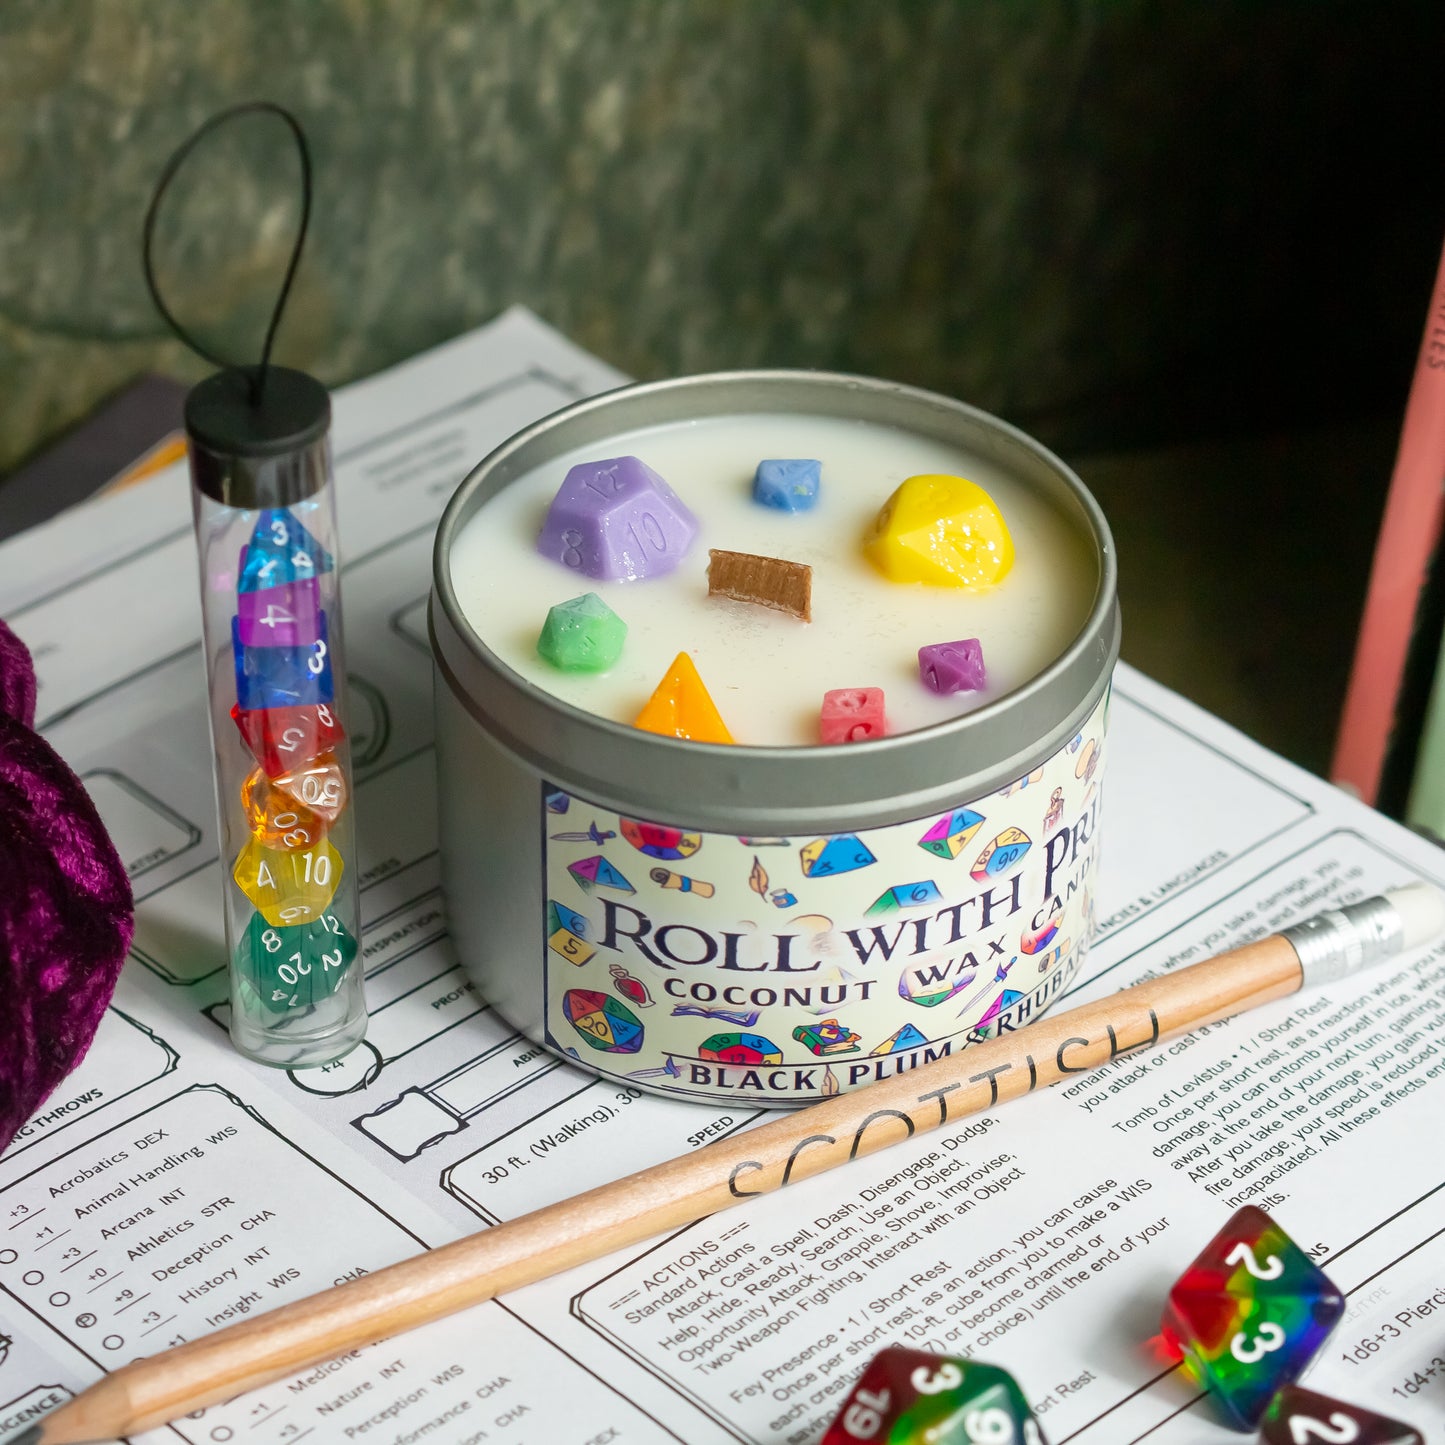 Roll with Pride, DnD Dice Candle, Wood Wick Candle, Rhubarb and Black Plum, Coconut Wax, Roleplay Candle, with Dice Wax Melts, 35+ Hours